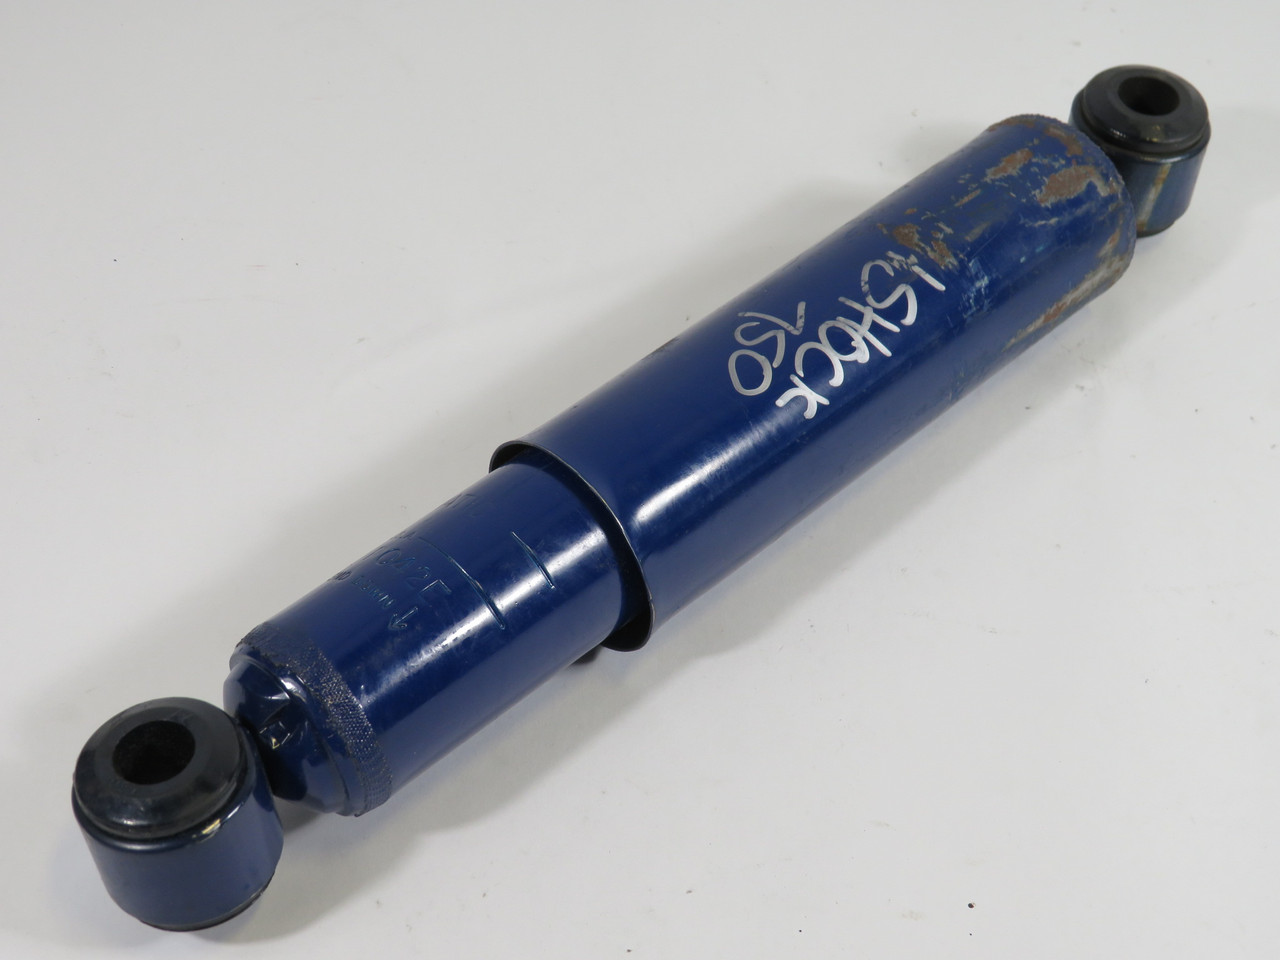 Monro-Matic 1004 Shock Absorber 1SHOCK750 COSMETIC DAMAGE USED